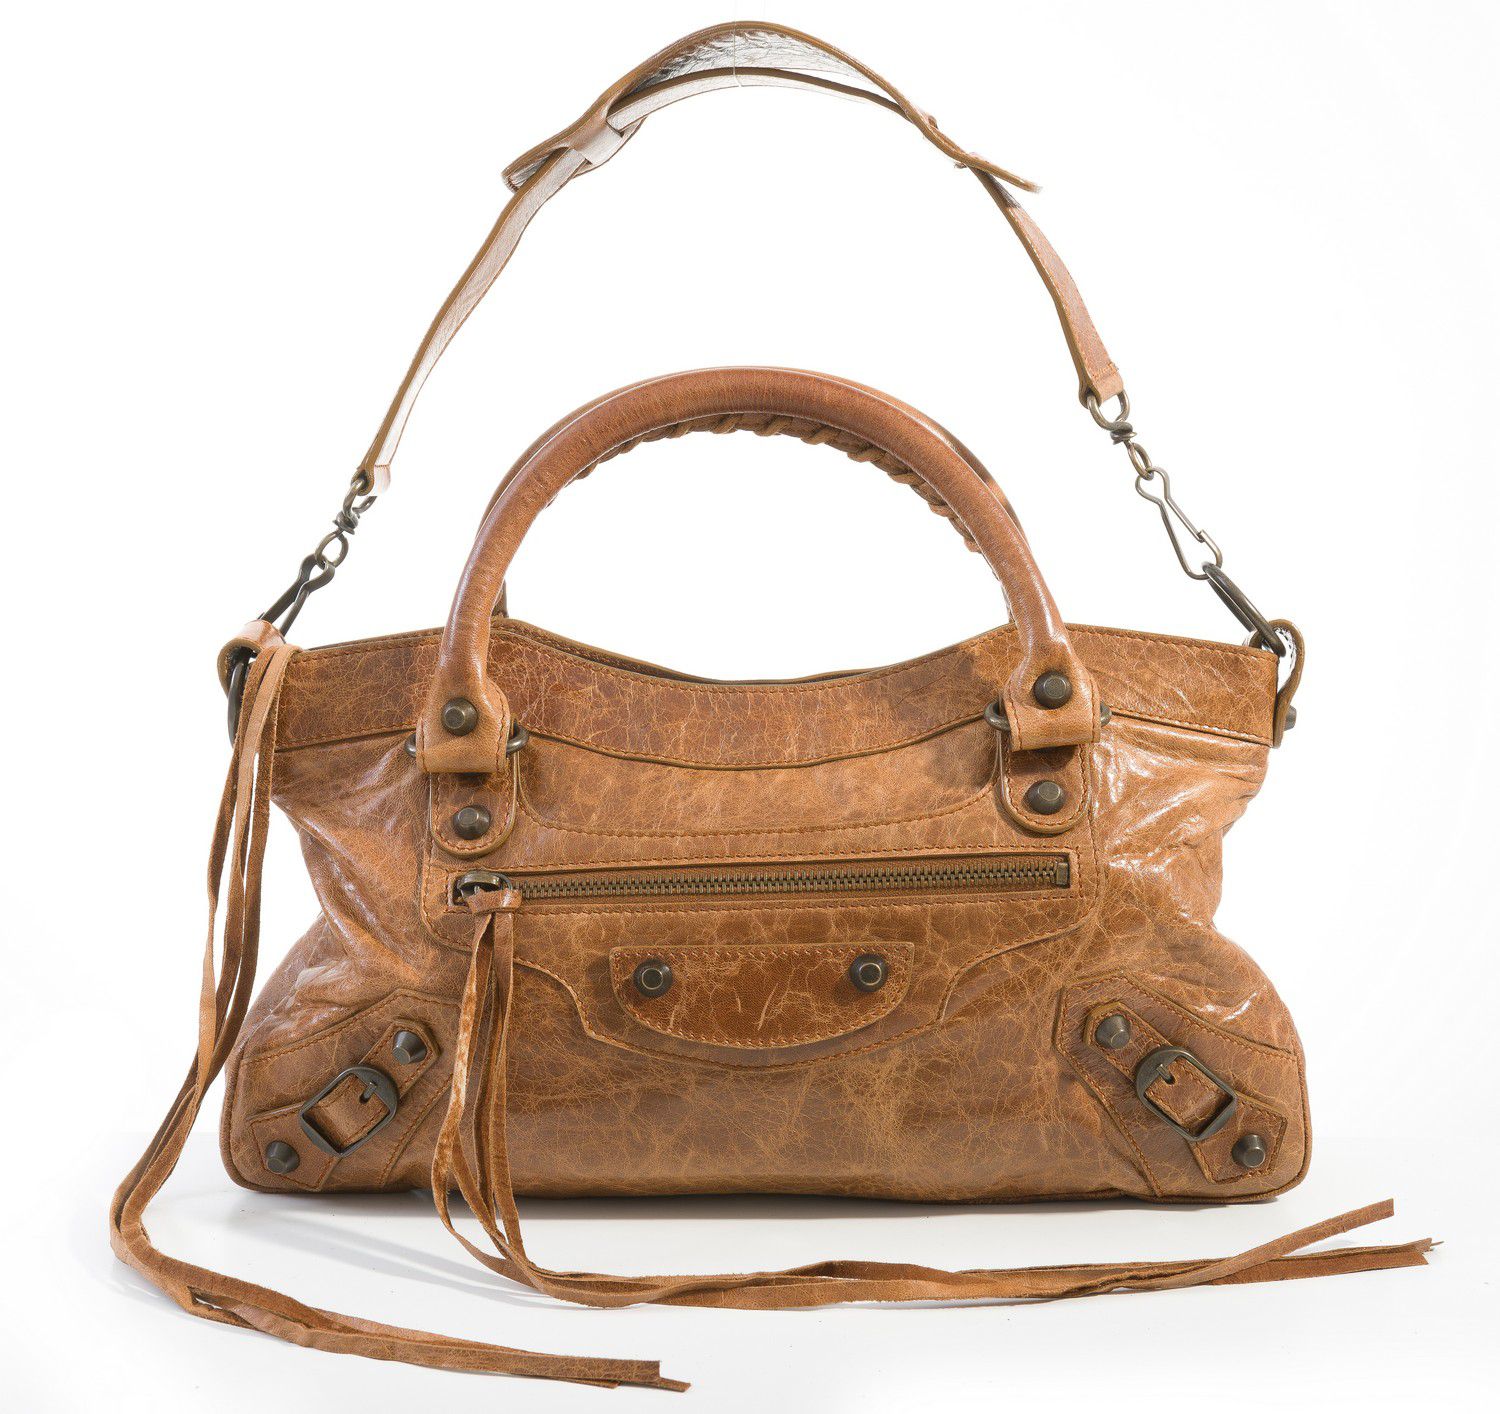 A handbag by Balenciaga, styled in distressed tan leather with ...